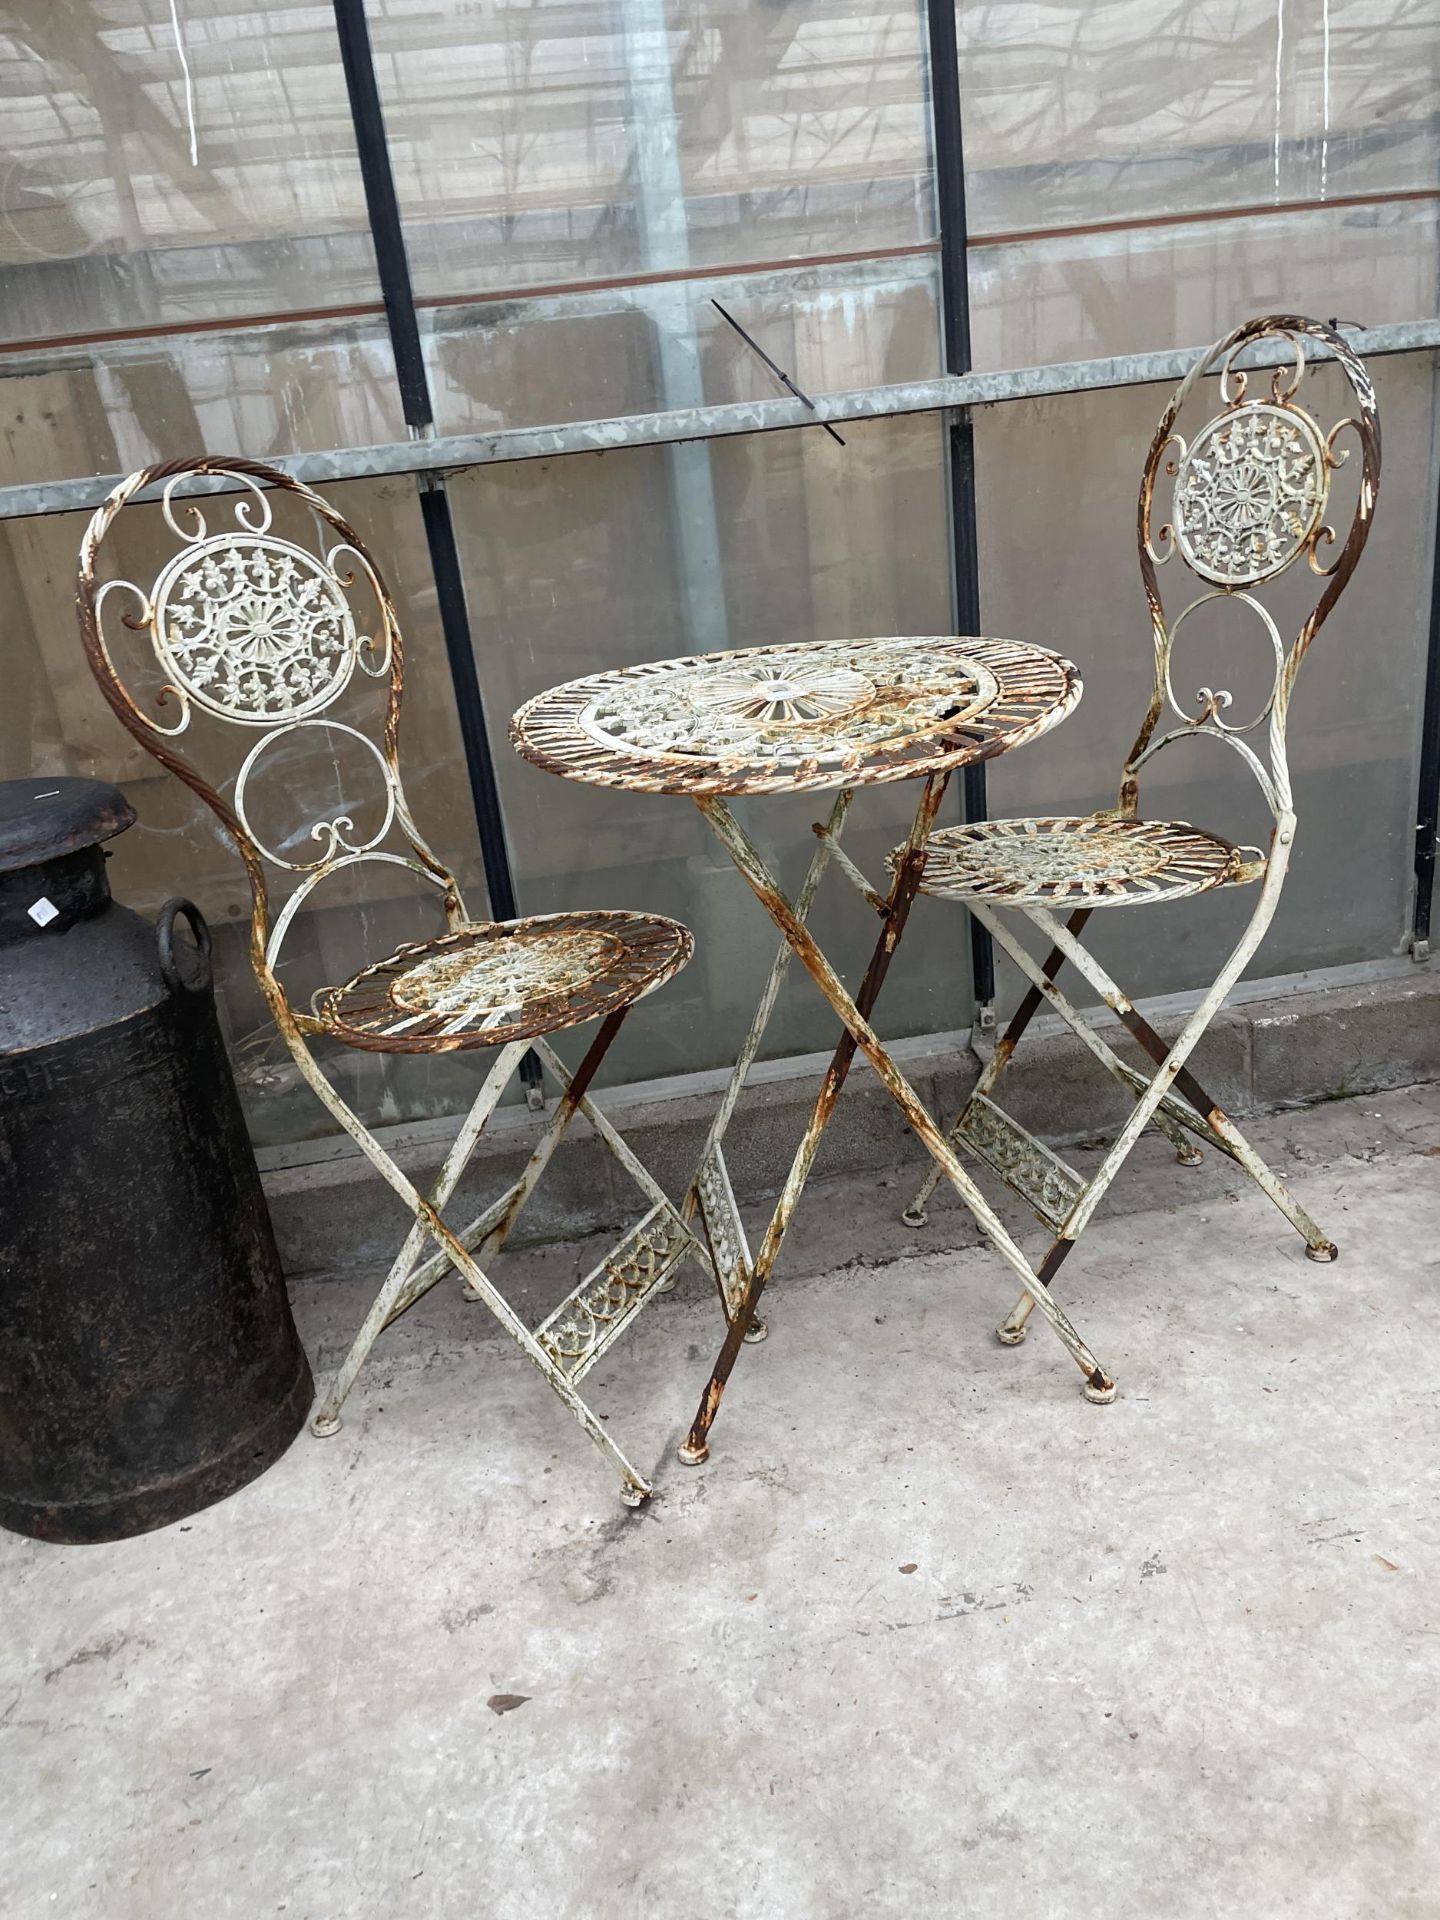 A VINTAGE FOLDING METAL BISTRO TABLE AND TWO CHAIRS - Image 2 of 2